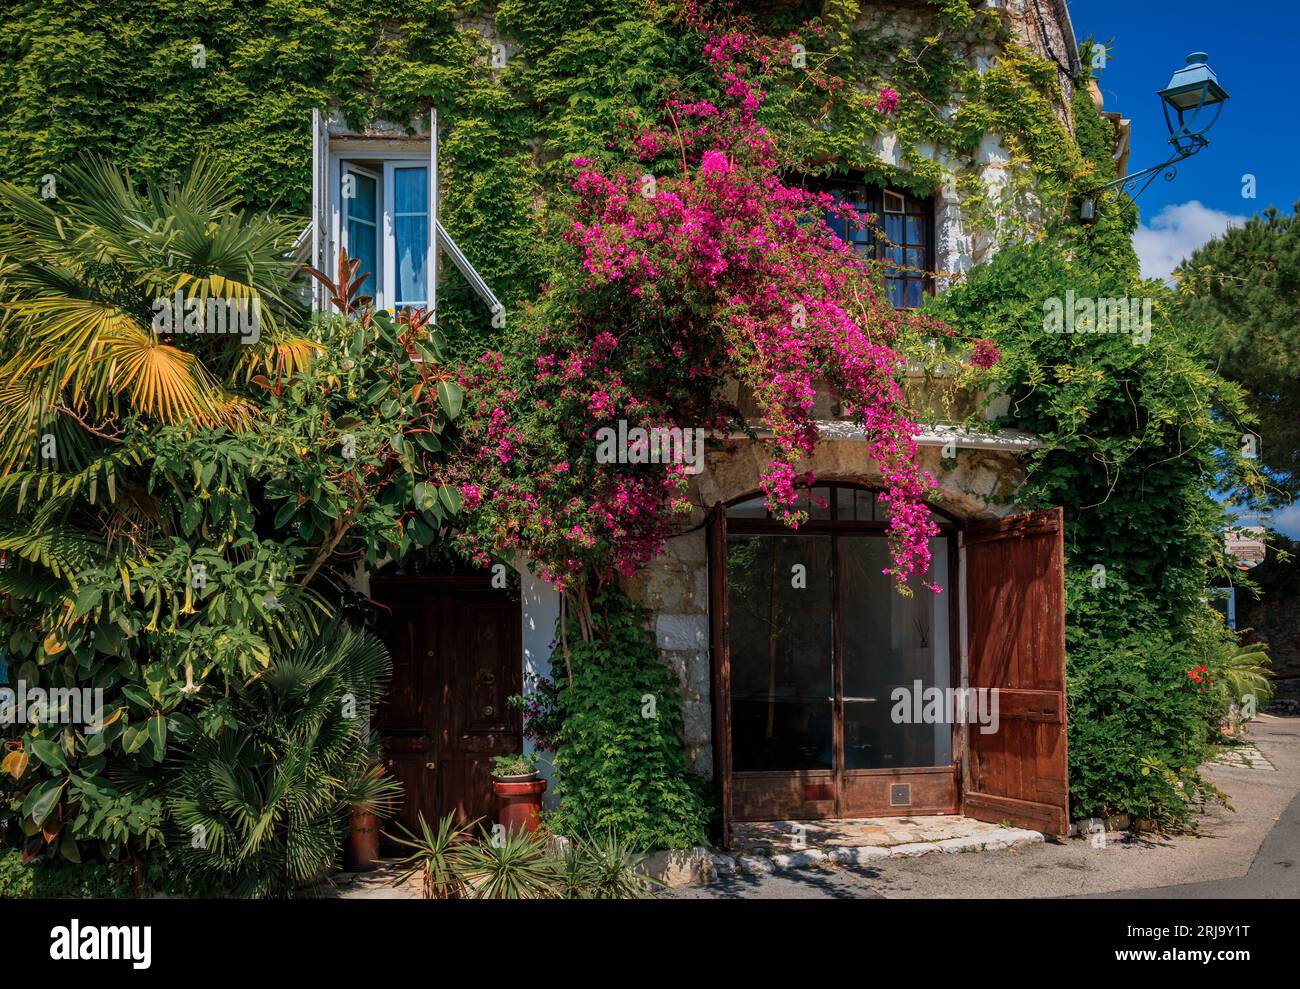 Blooming bougainvilia, jasmine and ivy covered wall of am old stone house in the medieval town of Saint Paul de Vence, French Riviera, South of France Stock Photo